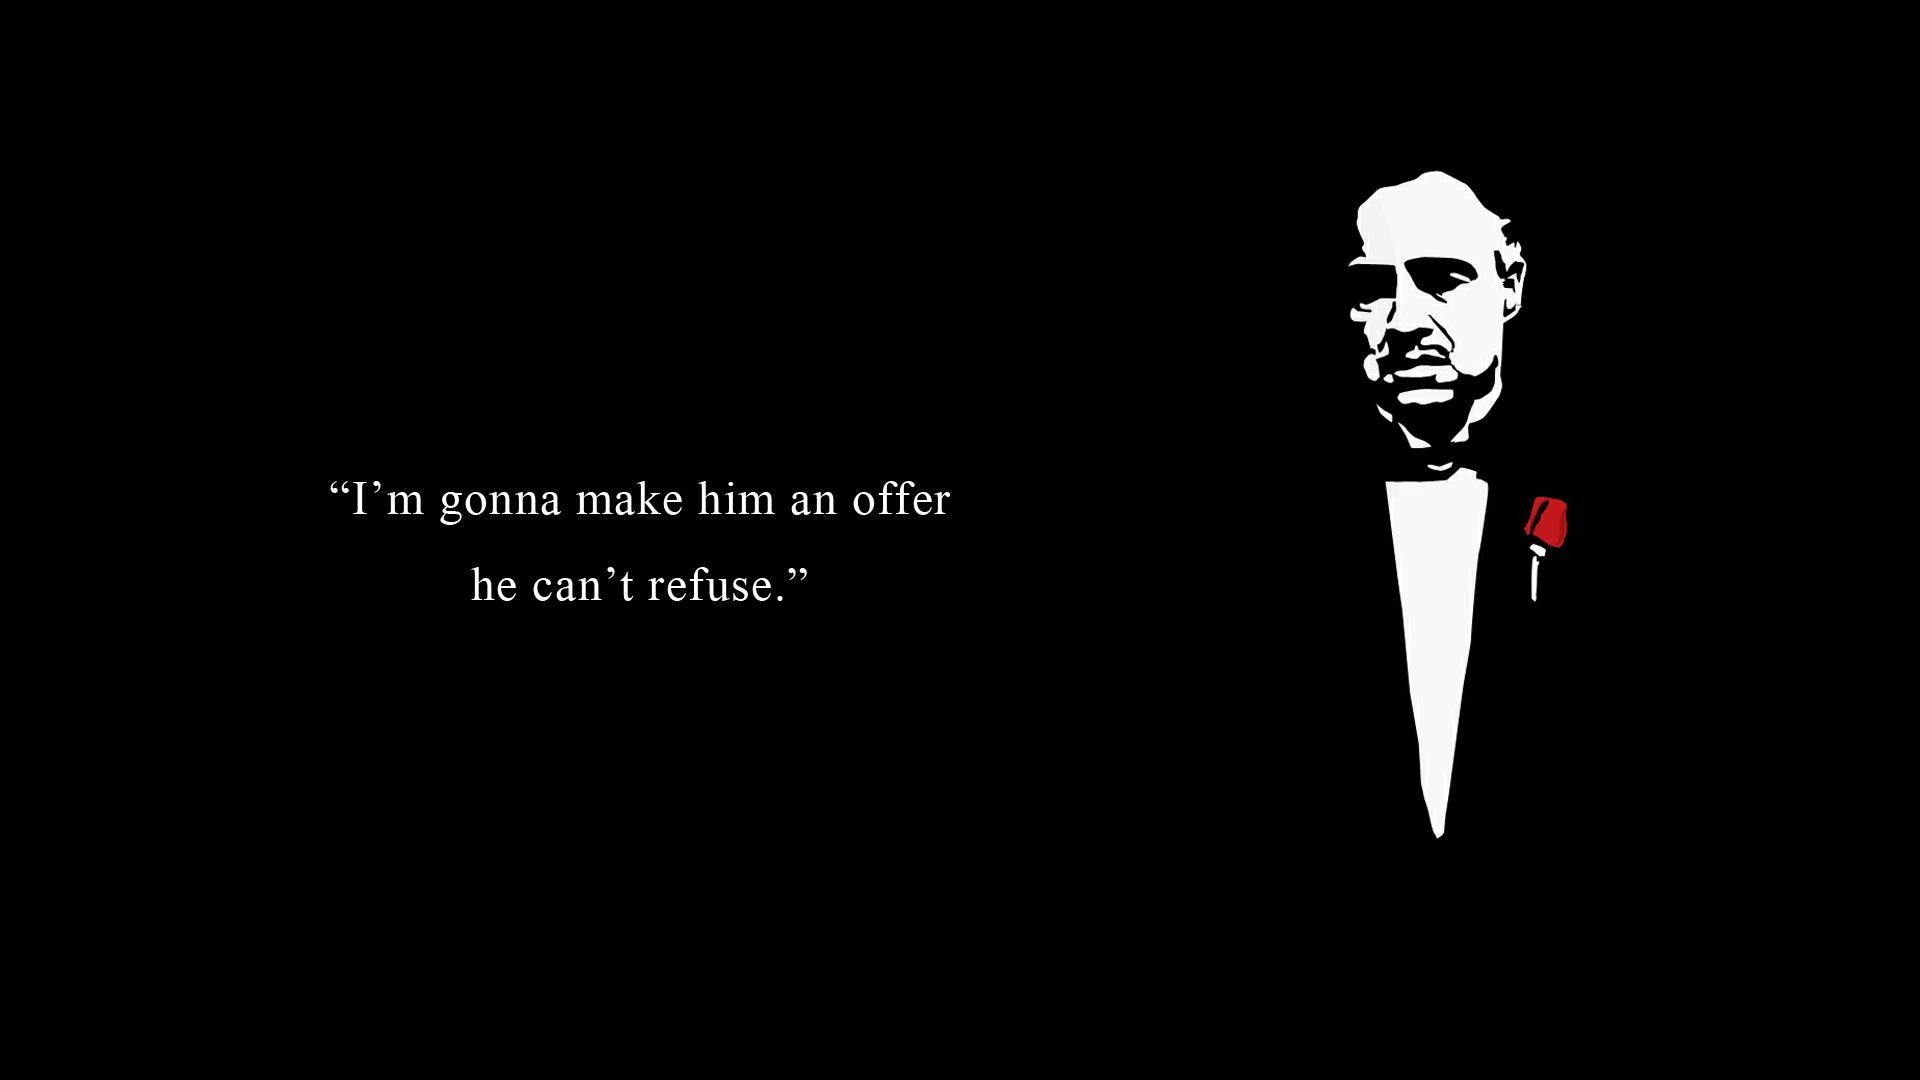 free-download-the-godfather-black-offer-mafia-movie-movies-wallpaper